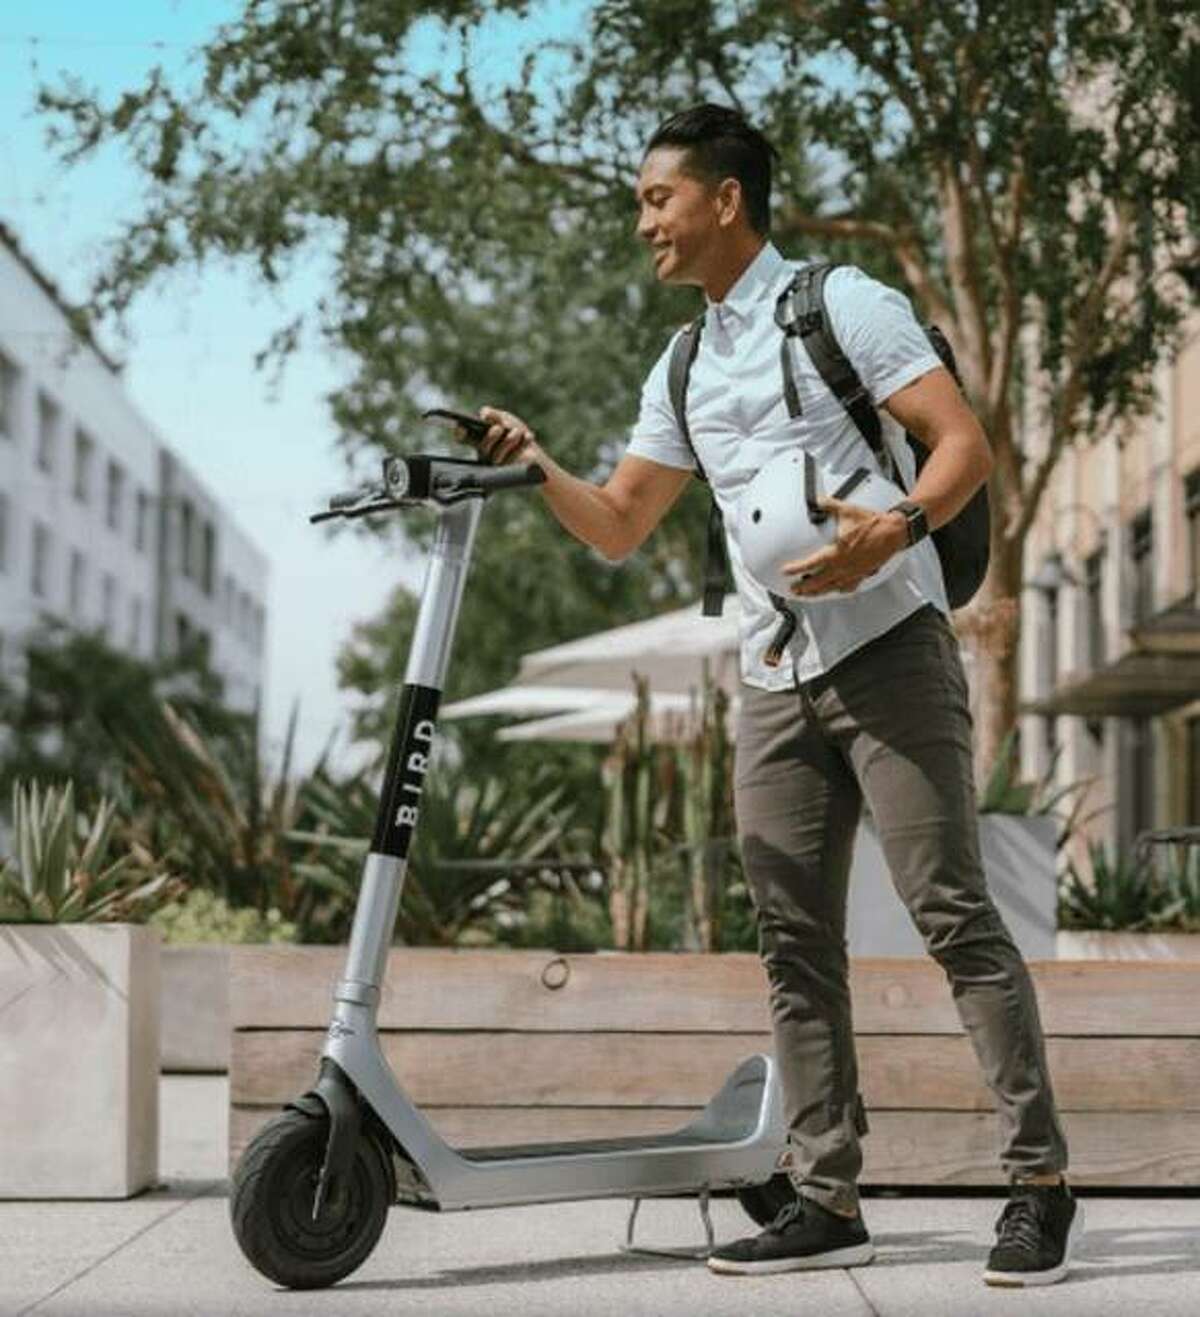 Bird Rides, Inc., had proposed provide rented electric scooters in Alton. On Monday, aldermen voted against the proposal.